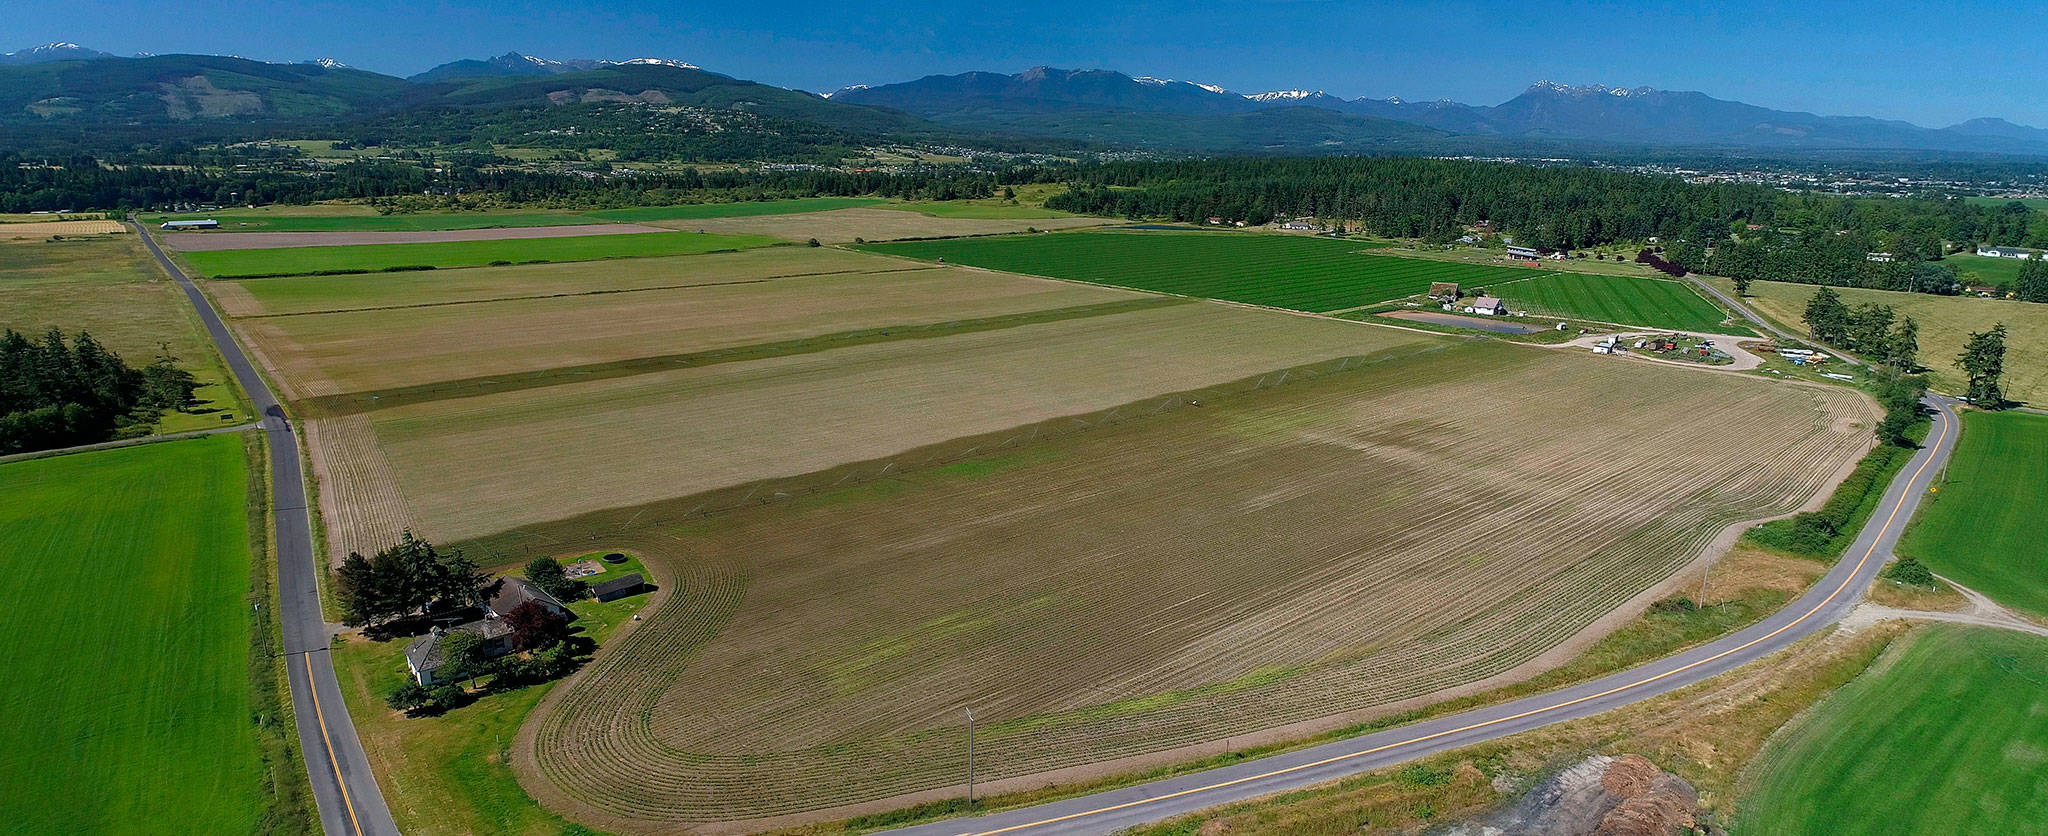 The North olympic Land Trust is looking to conserve Wonderland & The 80 properties in Sequim; at 132 acres, it would be the largest farmland conservation in Clallam County. Photo by John Gussman